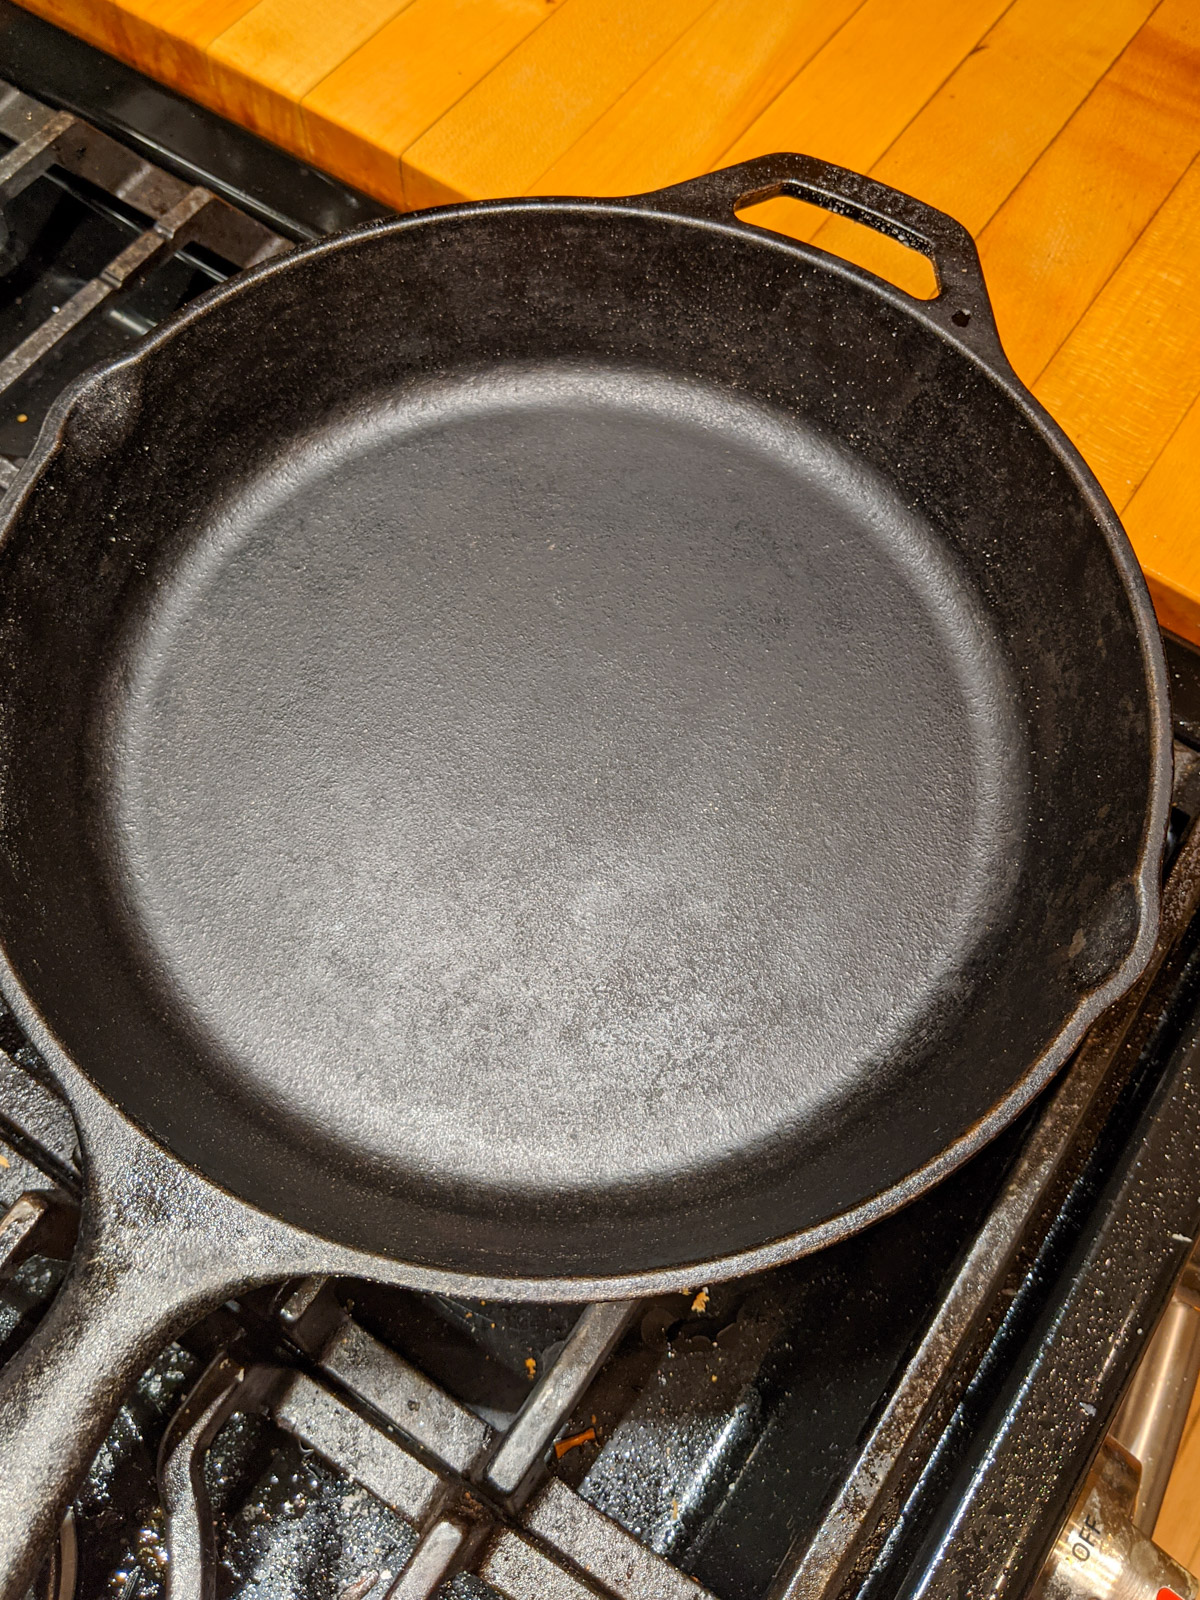 A cleaned cast iron skillet.